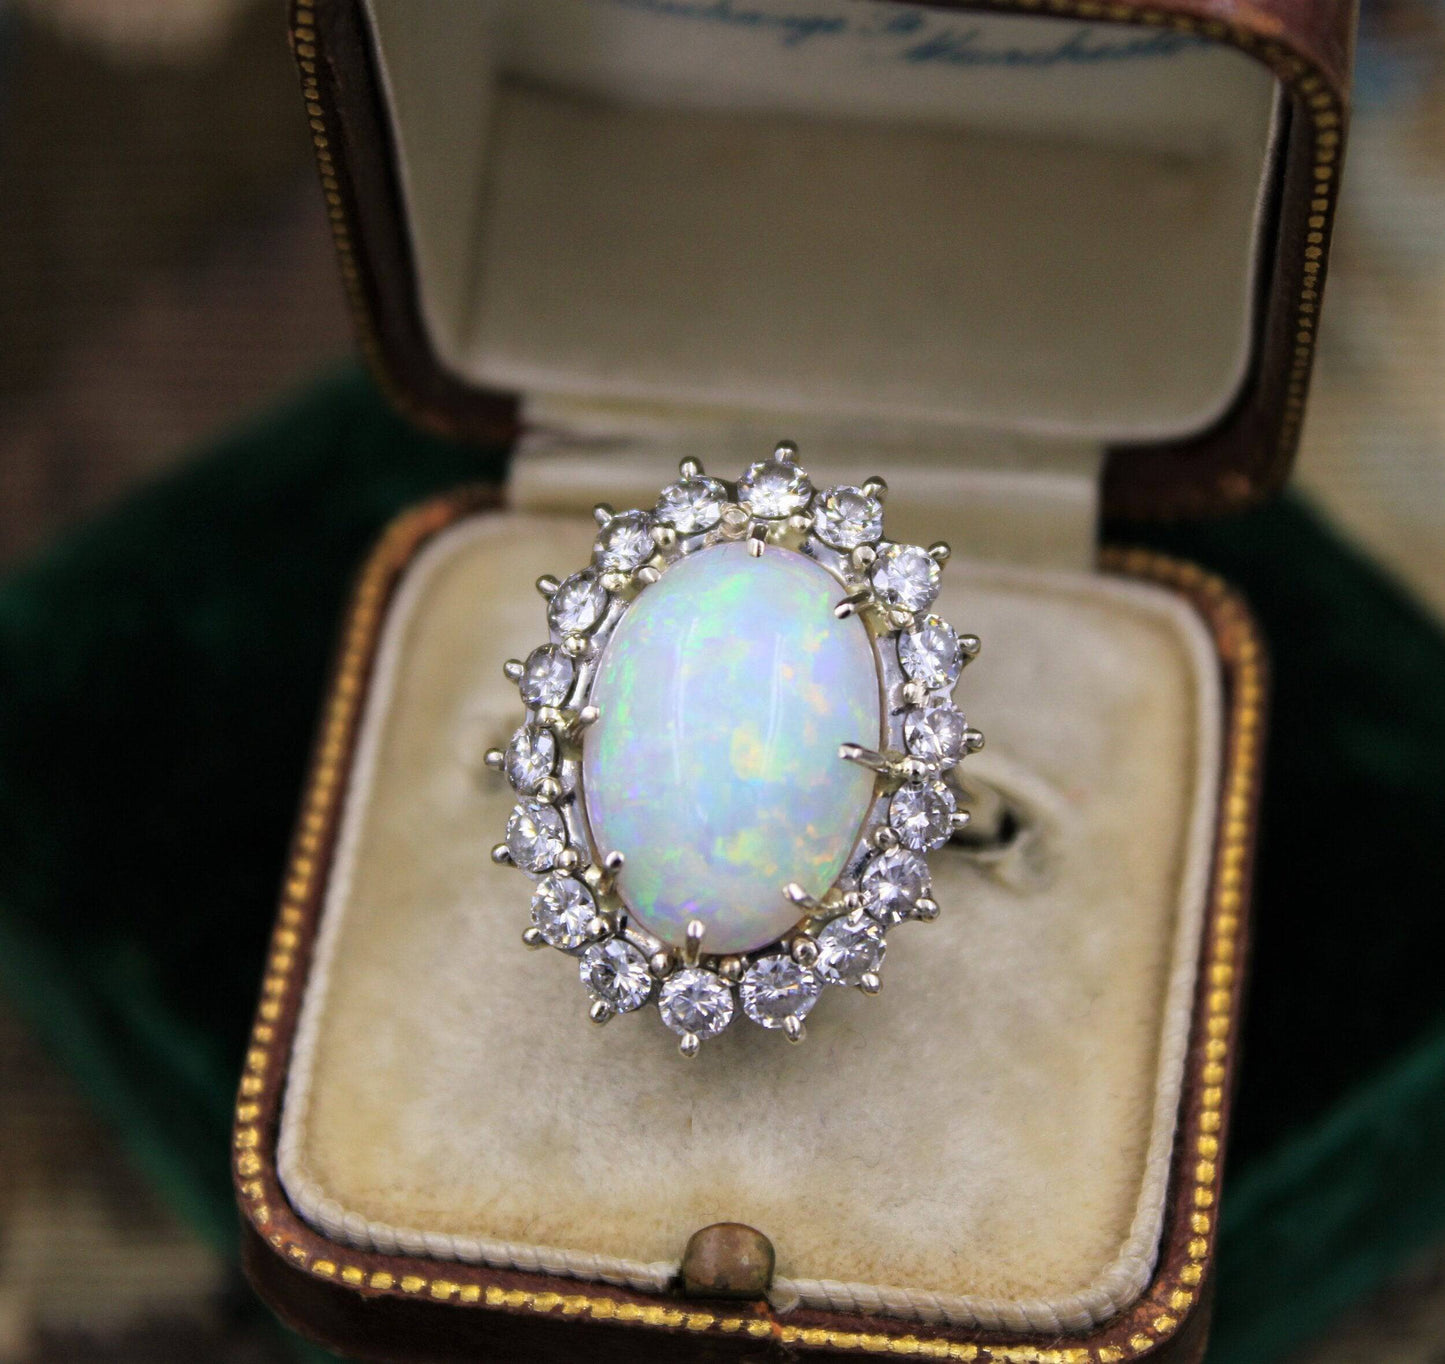 A very fine Opal and Diamond Cluster Ring set in 18ct White Gold, English, Circa 1960 - Robin Haydock Antiques